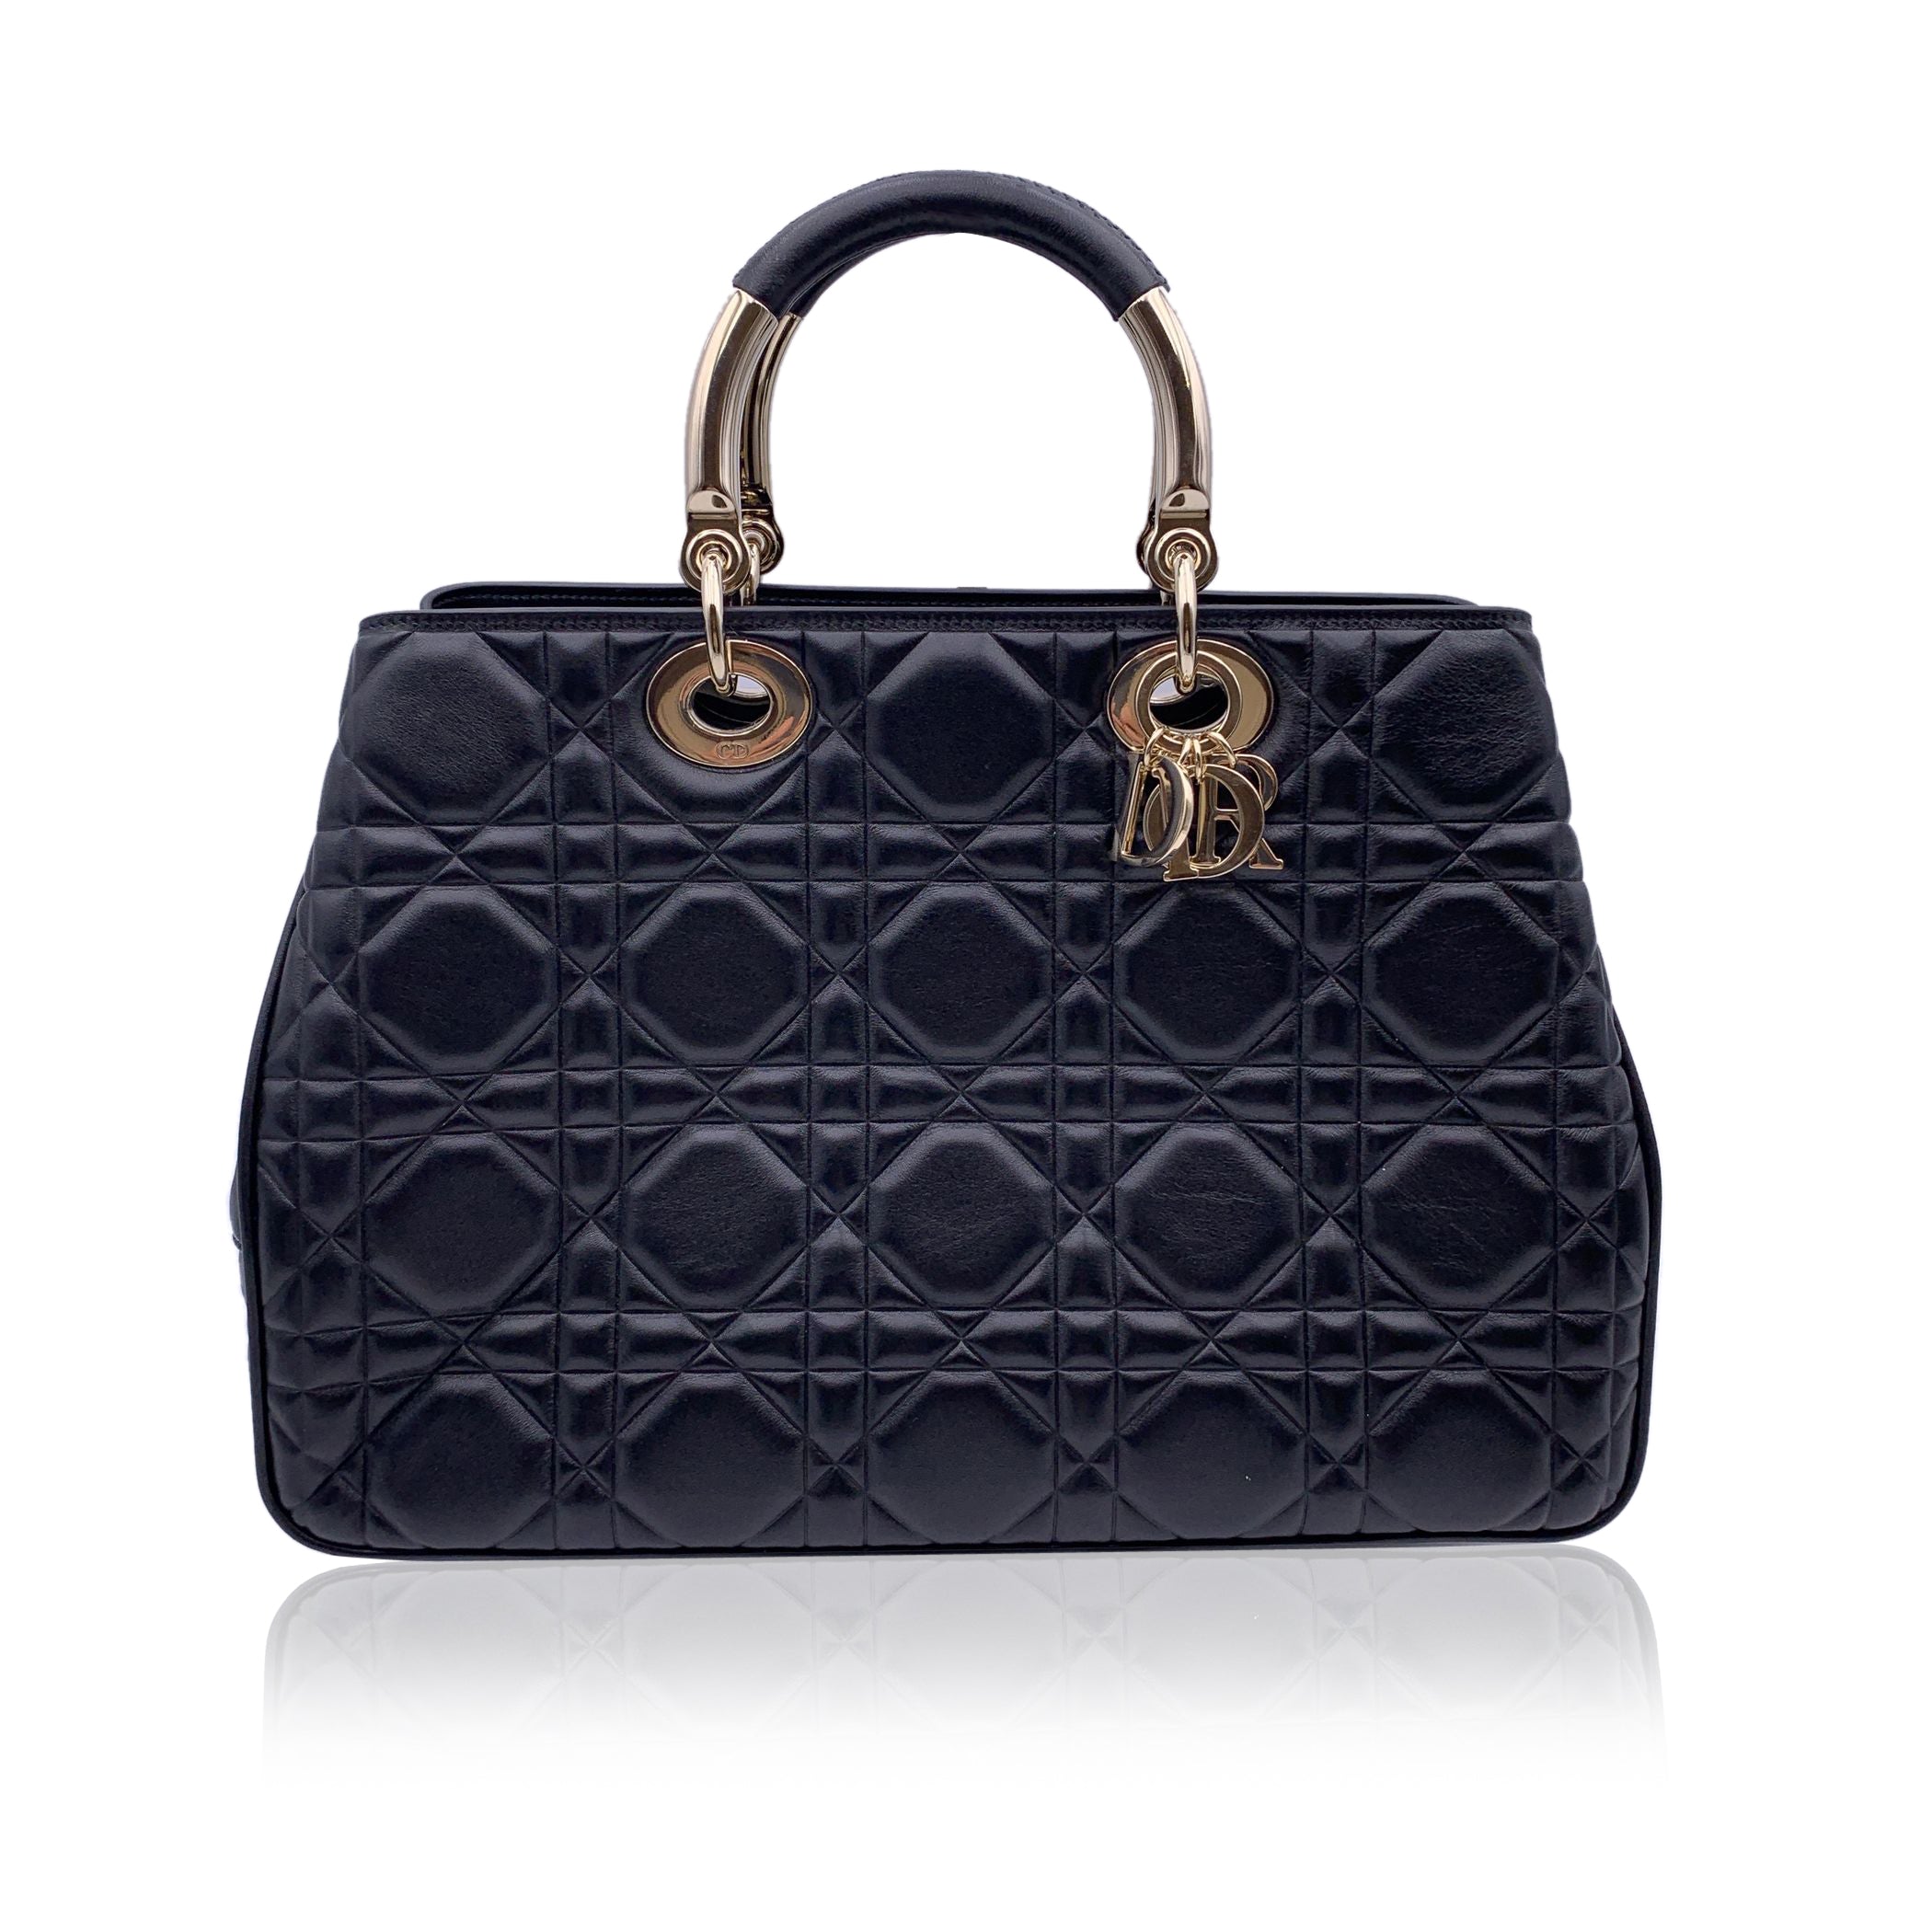 CHRISTIAN DIOR Totes Lady 95.22